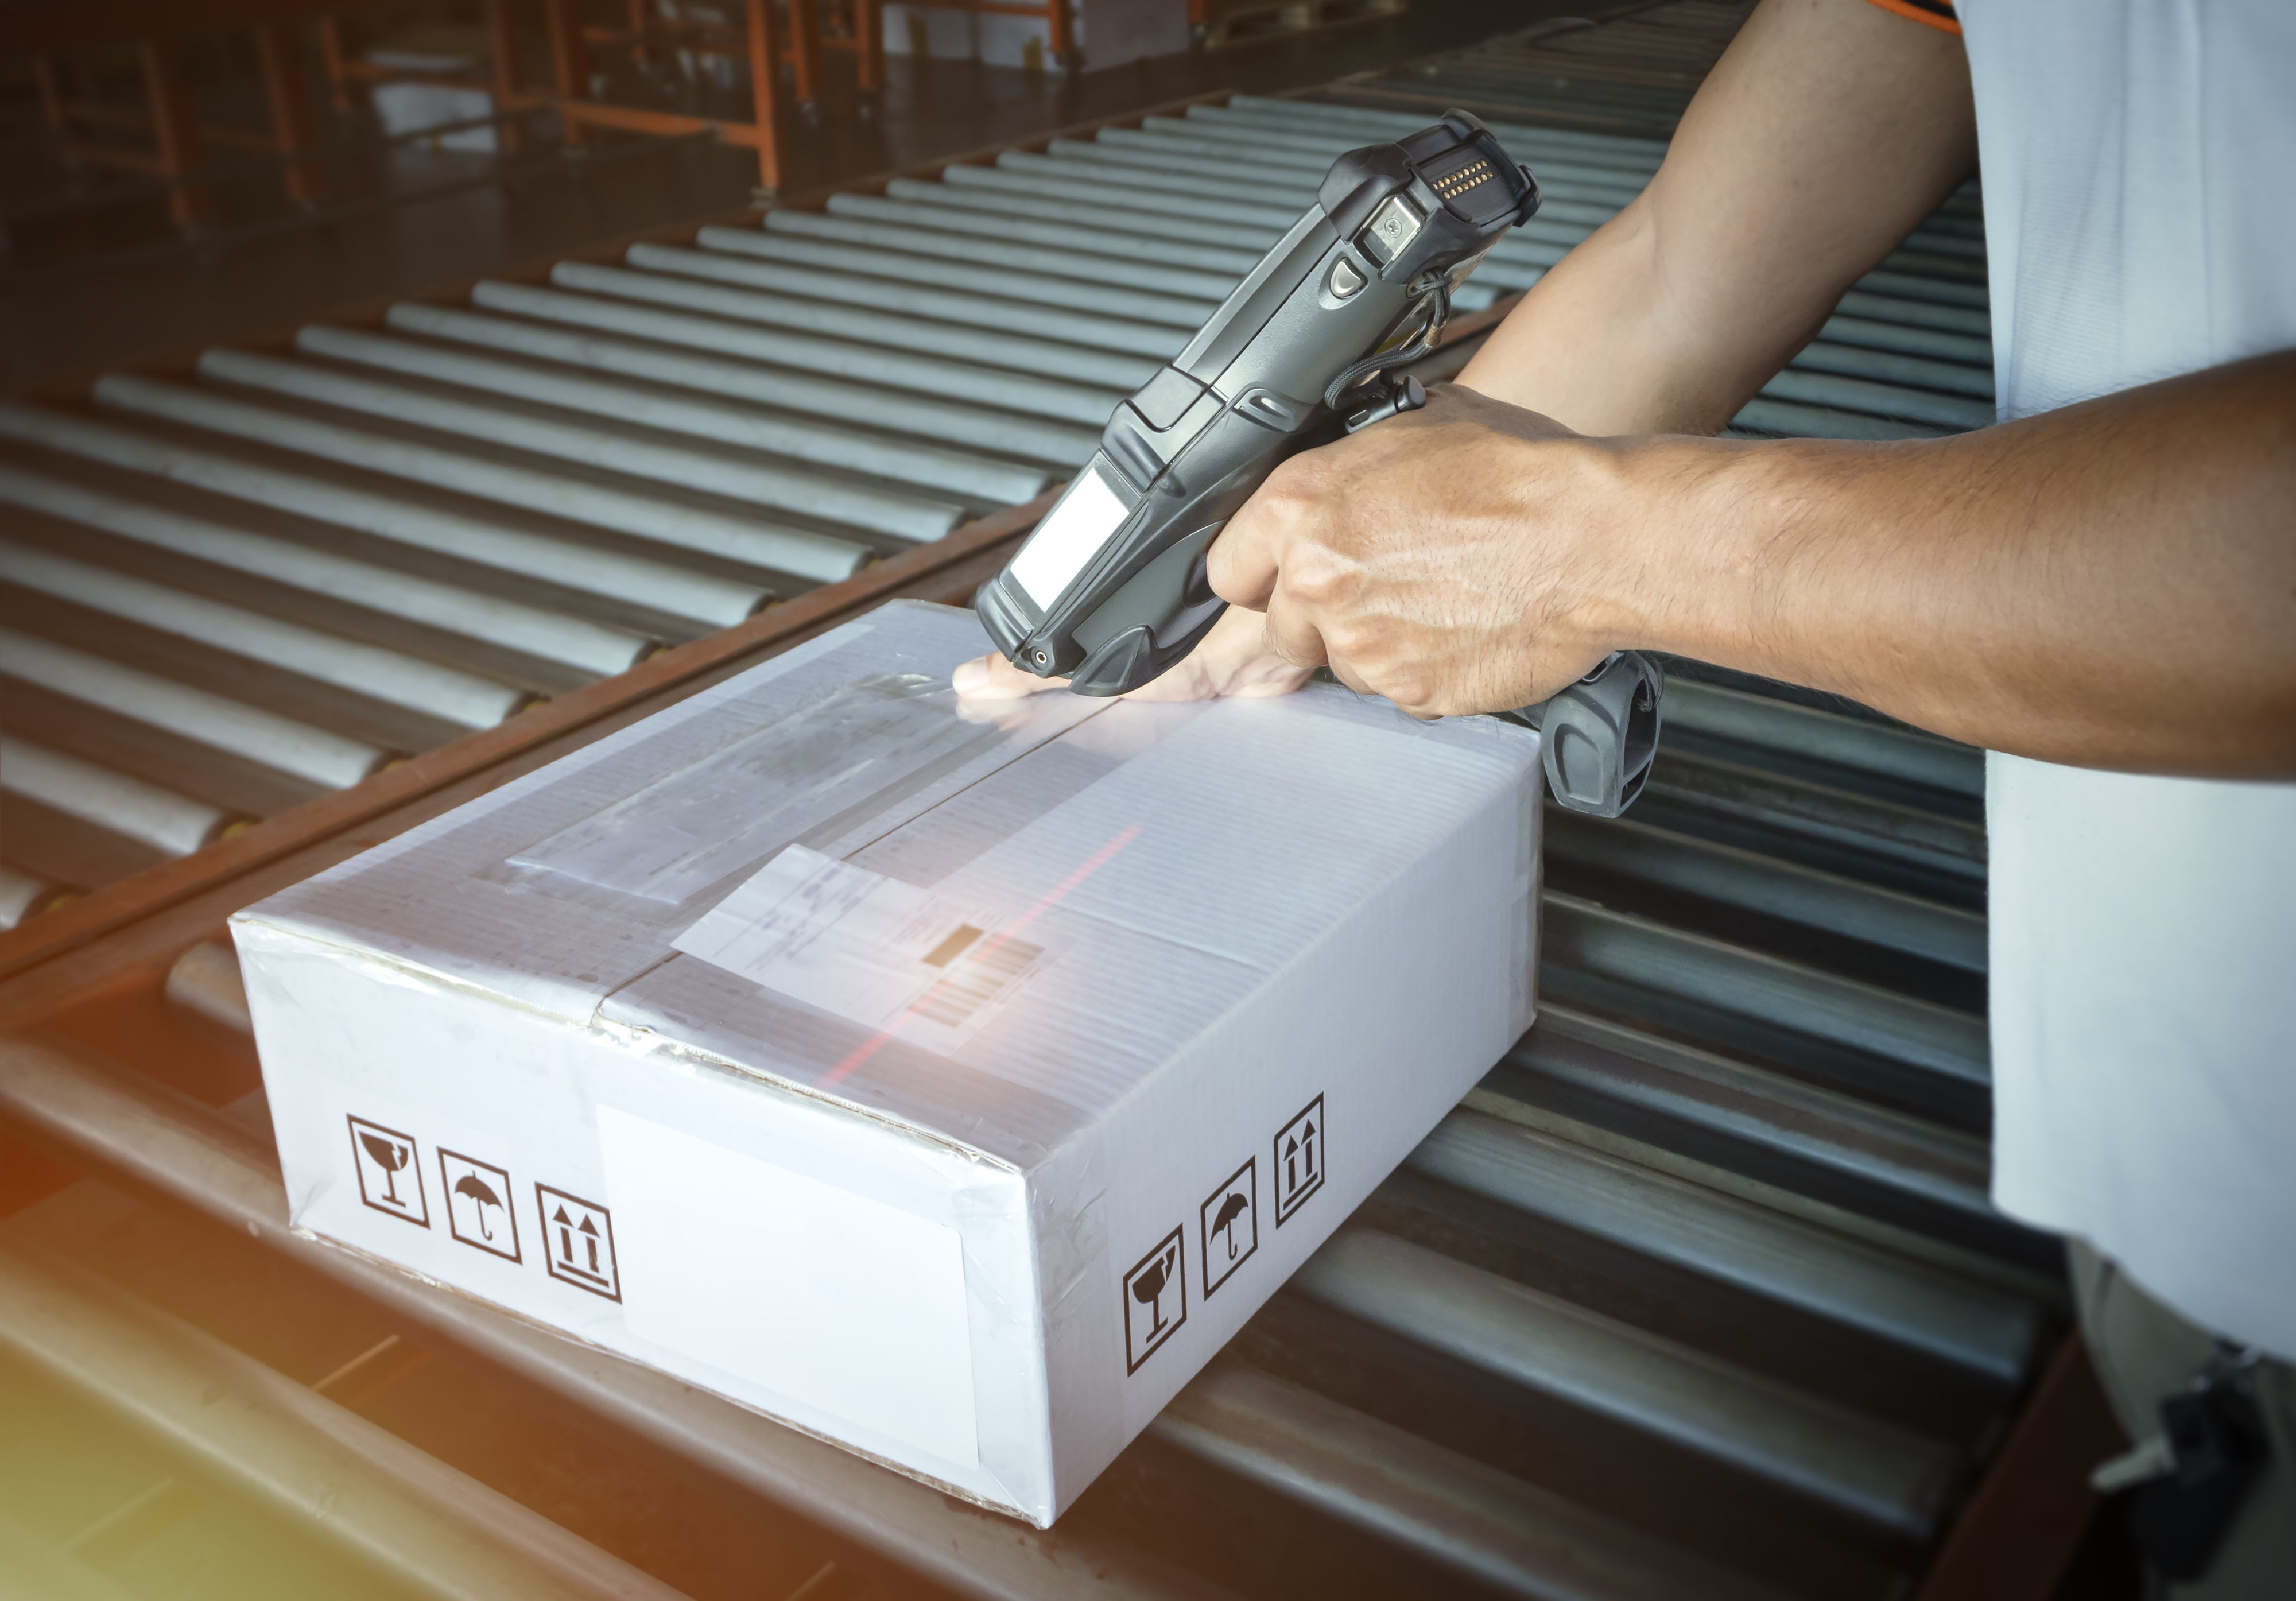 A person is scanning a package with a handheld barcode scanner in a warehouse setting